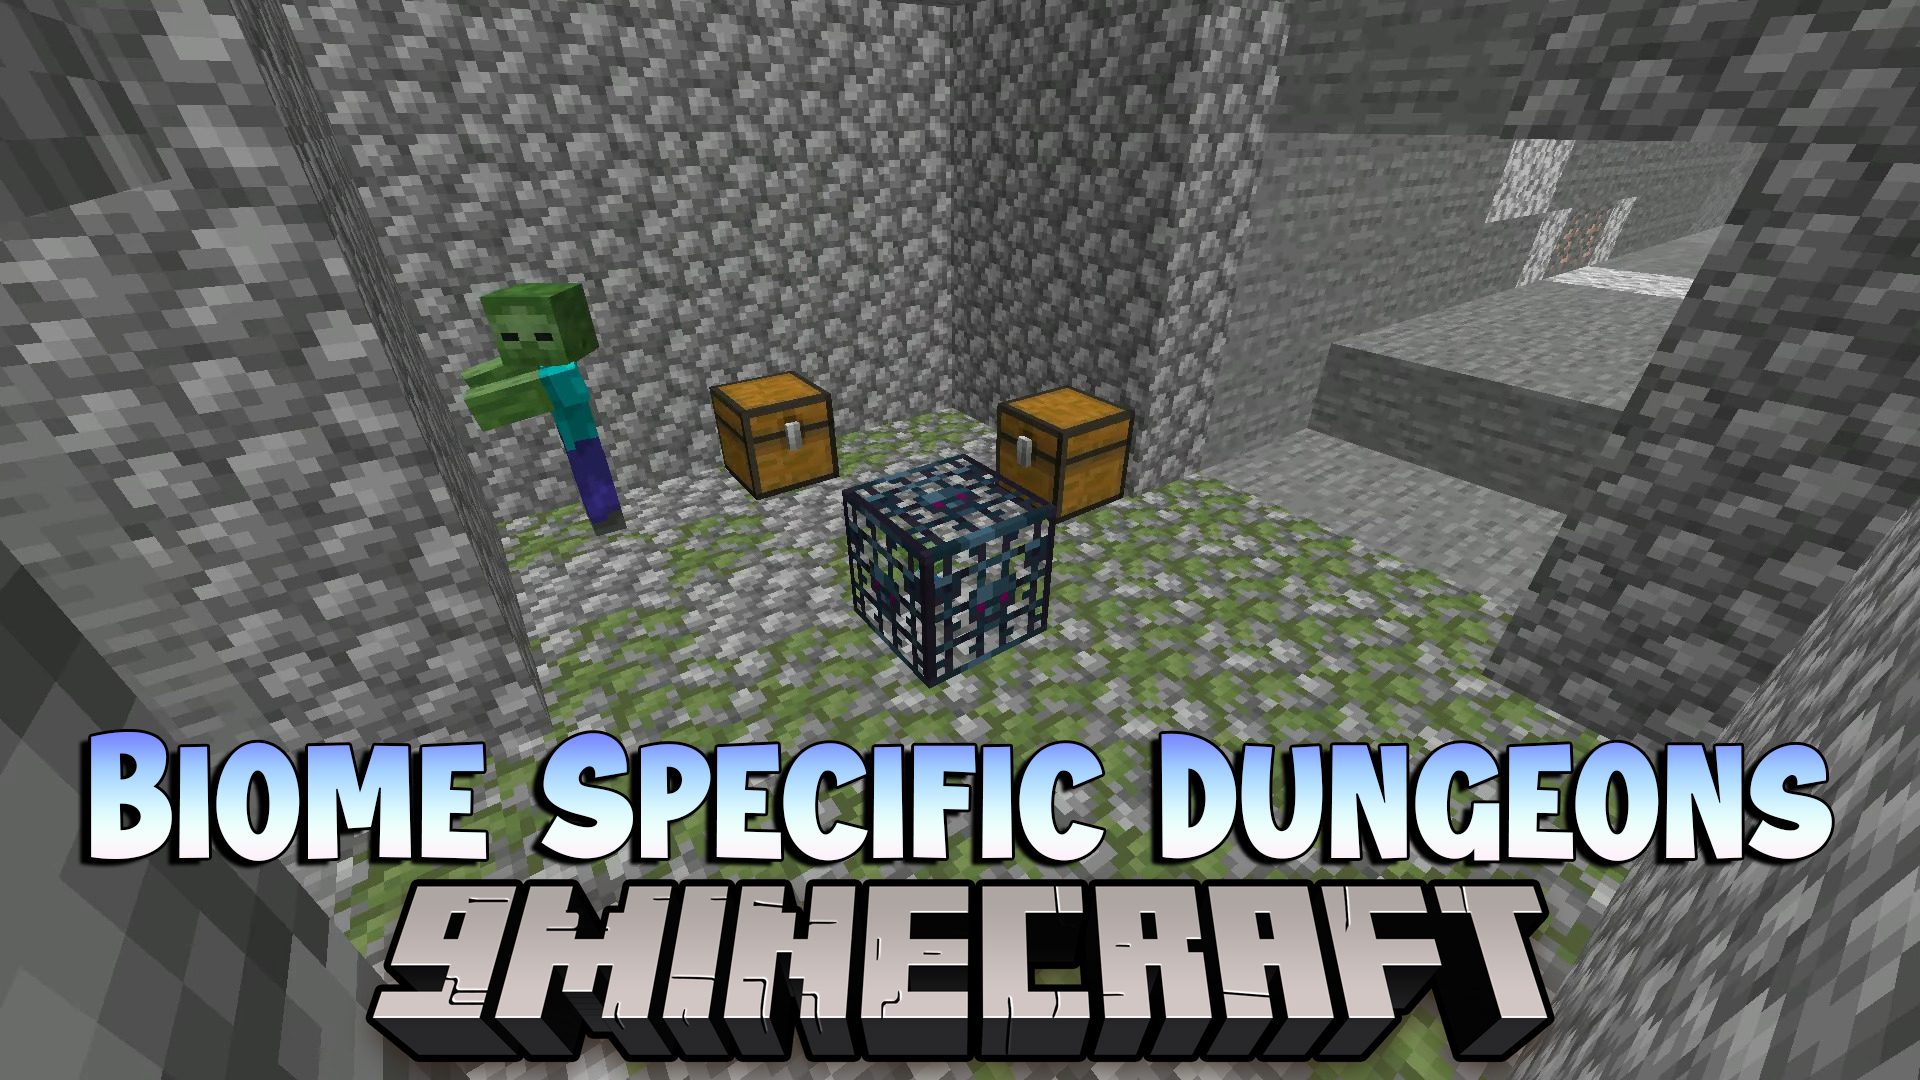 Biome Specific Dungeons Mod (1.12.2) - Dungeon Variants for Different Biomes 1